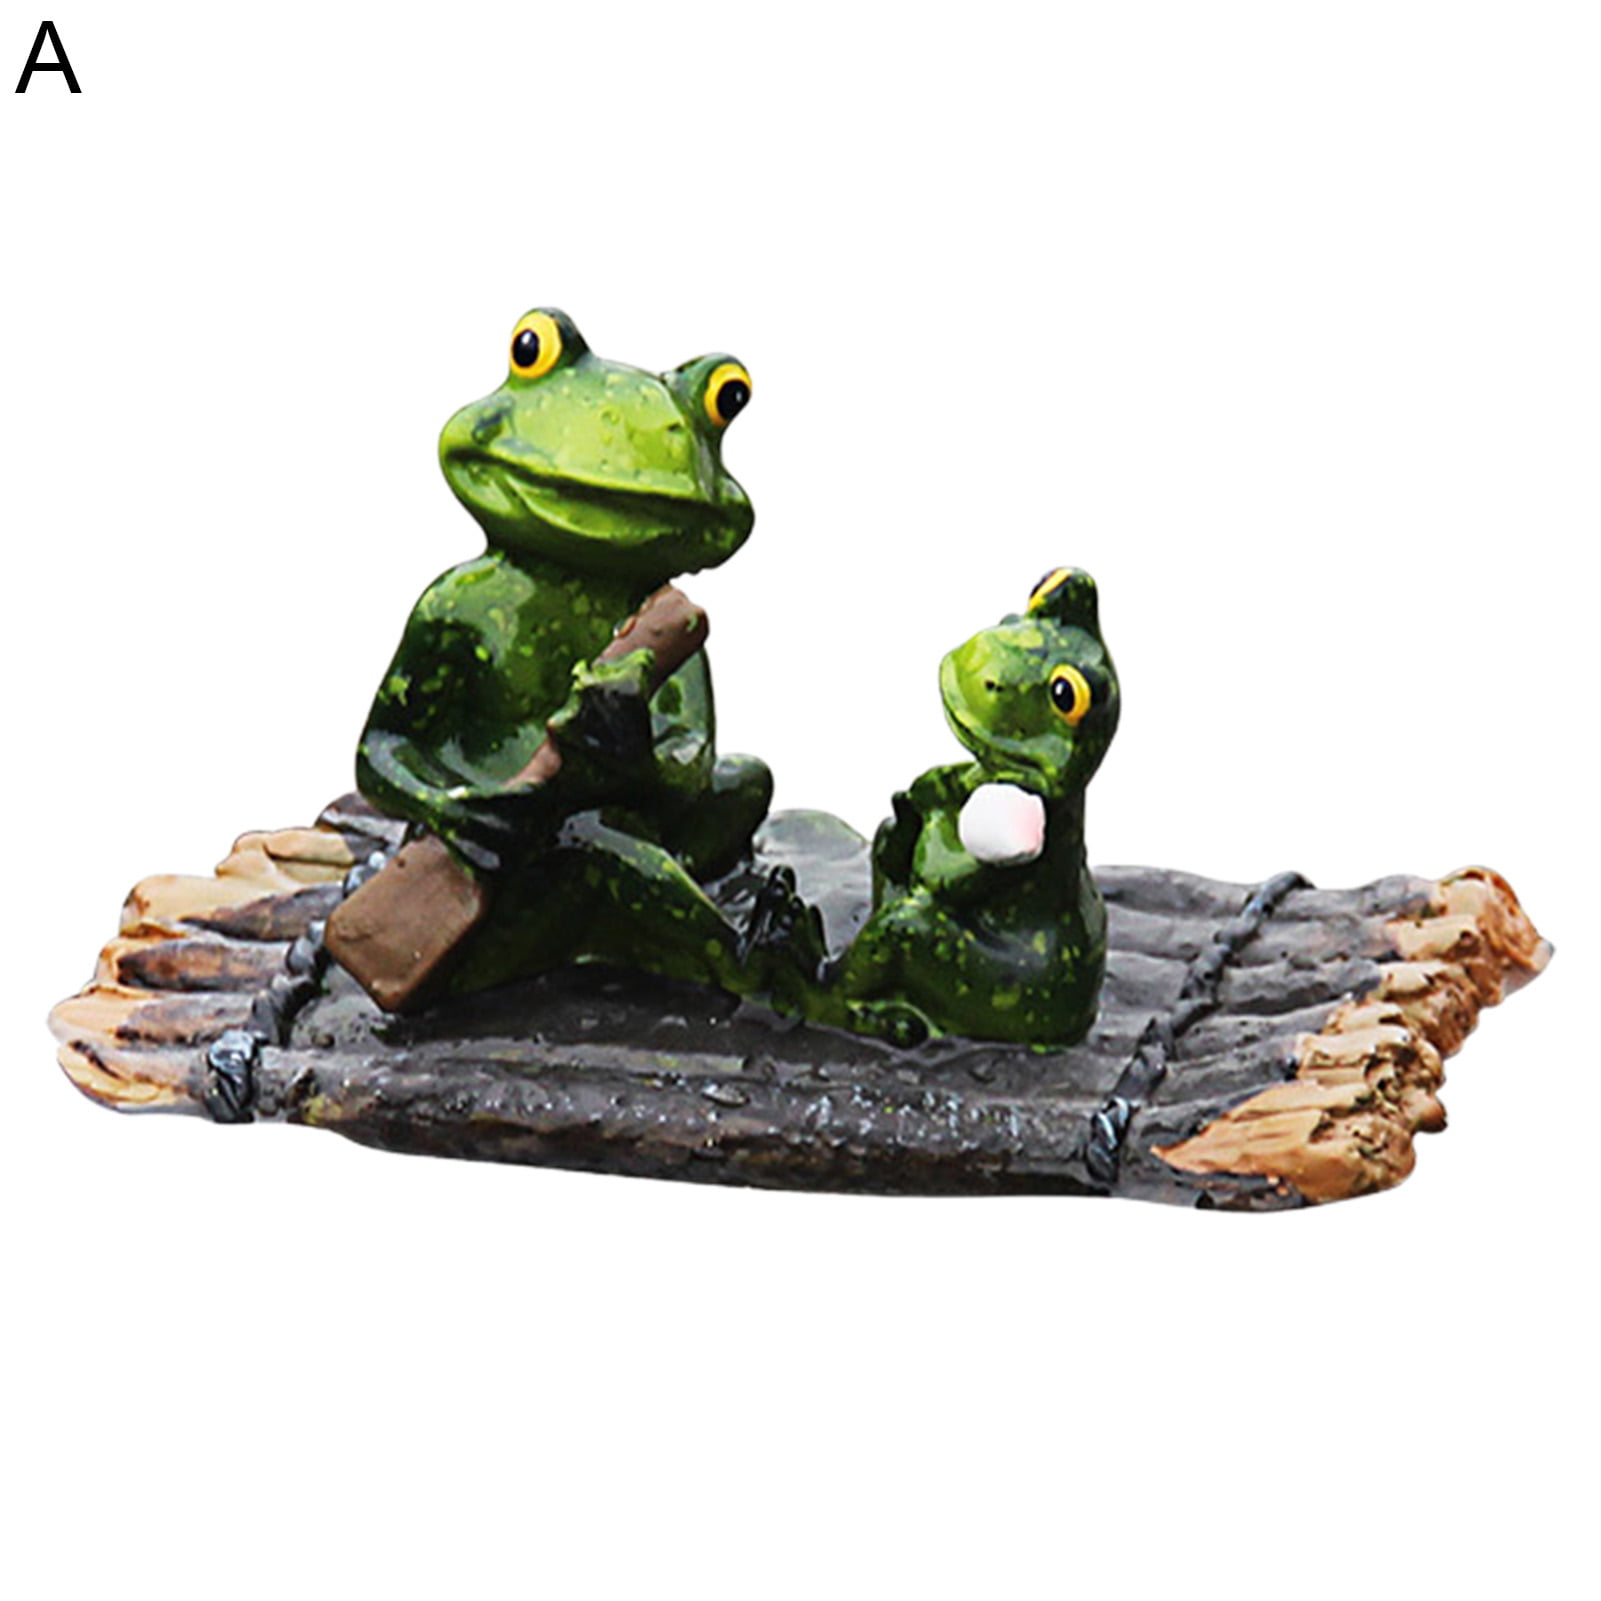 1X Green Frog Figurines Resin Colleation Gift Character Peeping Frog Desk Decor 